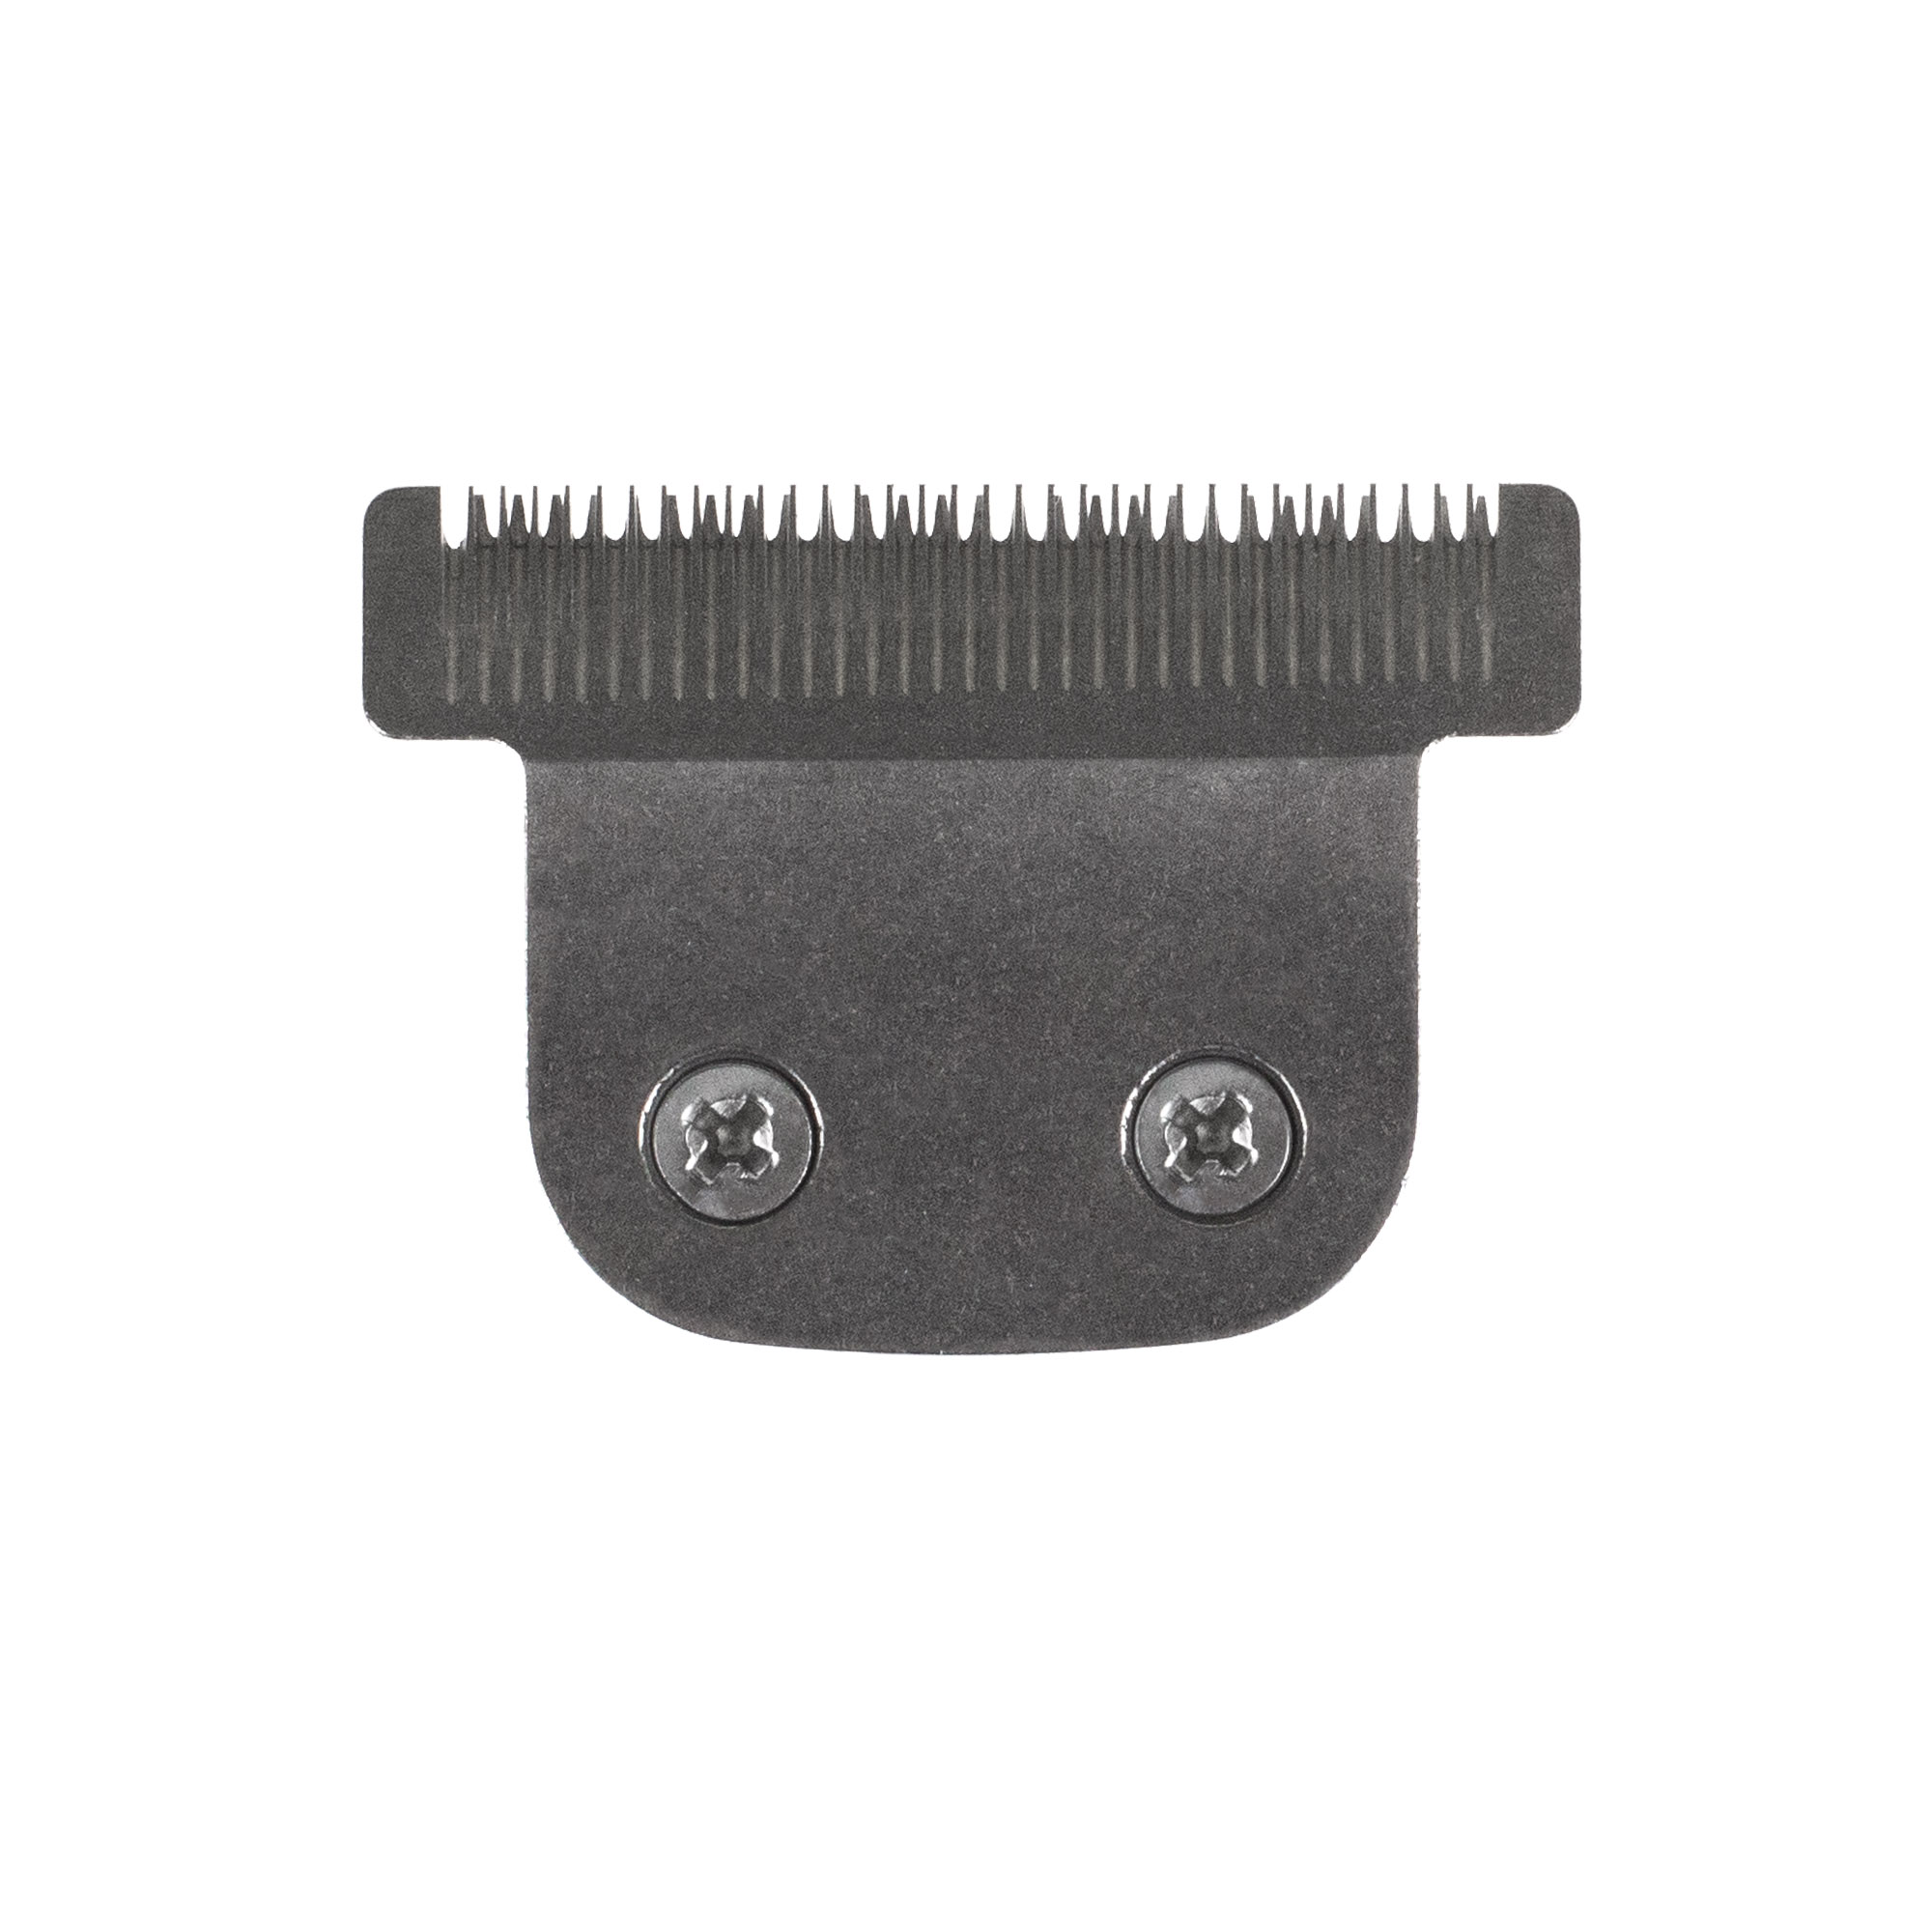 wahl model 9818 replacement blades